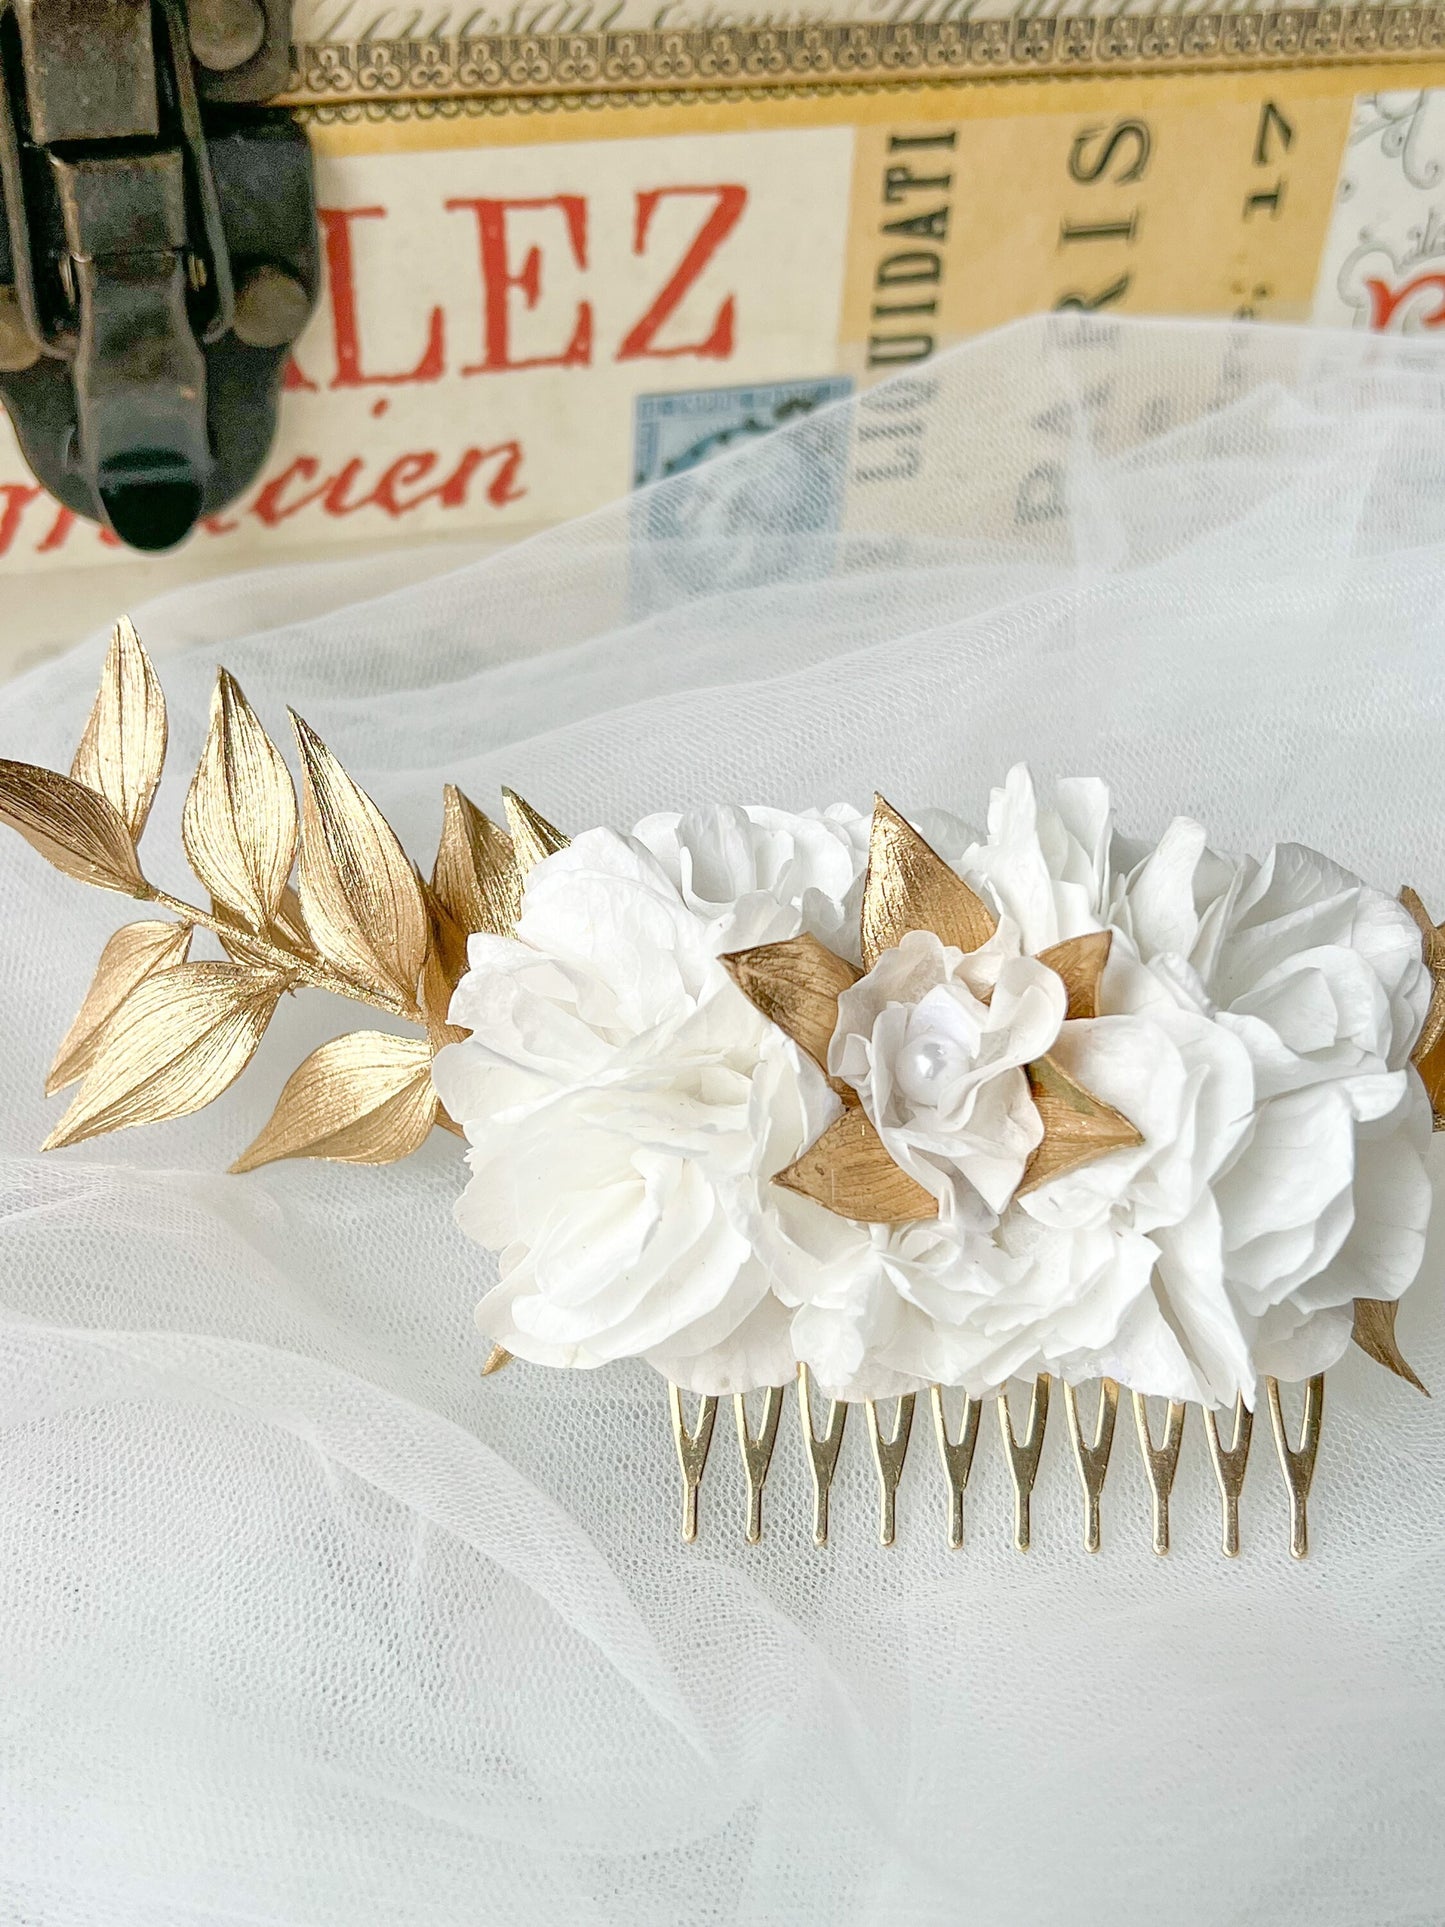 Gold and White Boho Bridal Everlasting Flower Comb, Preserved Hydrangea Italian Ruscus Wedding Hair Comb, Dried Flower Accessories for Bride